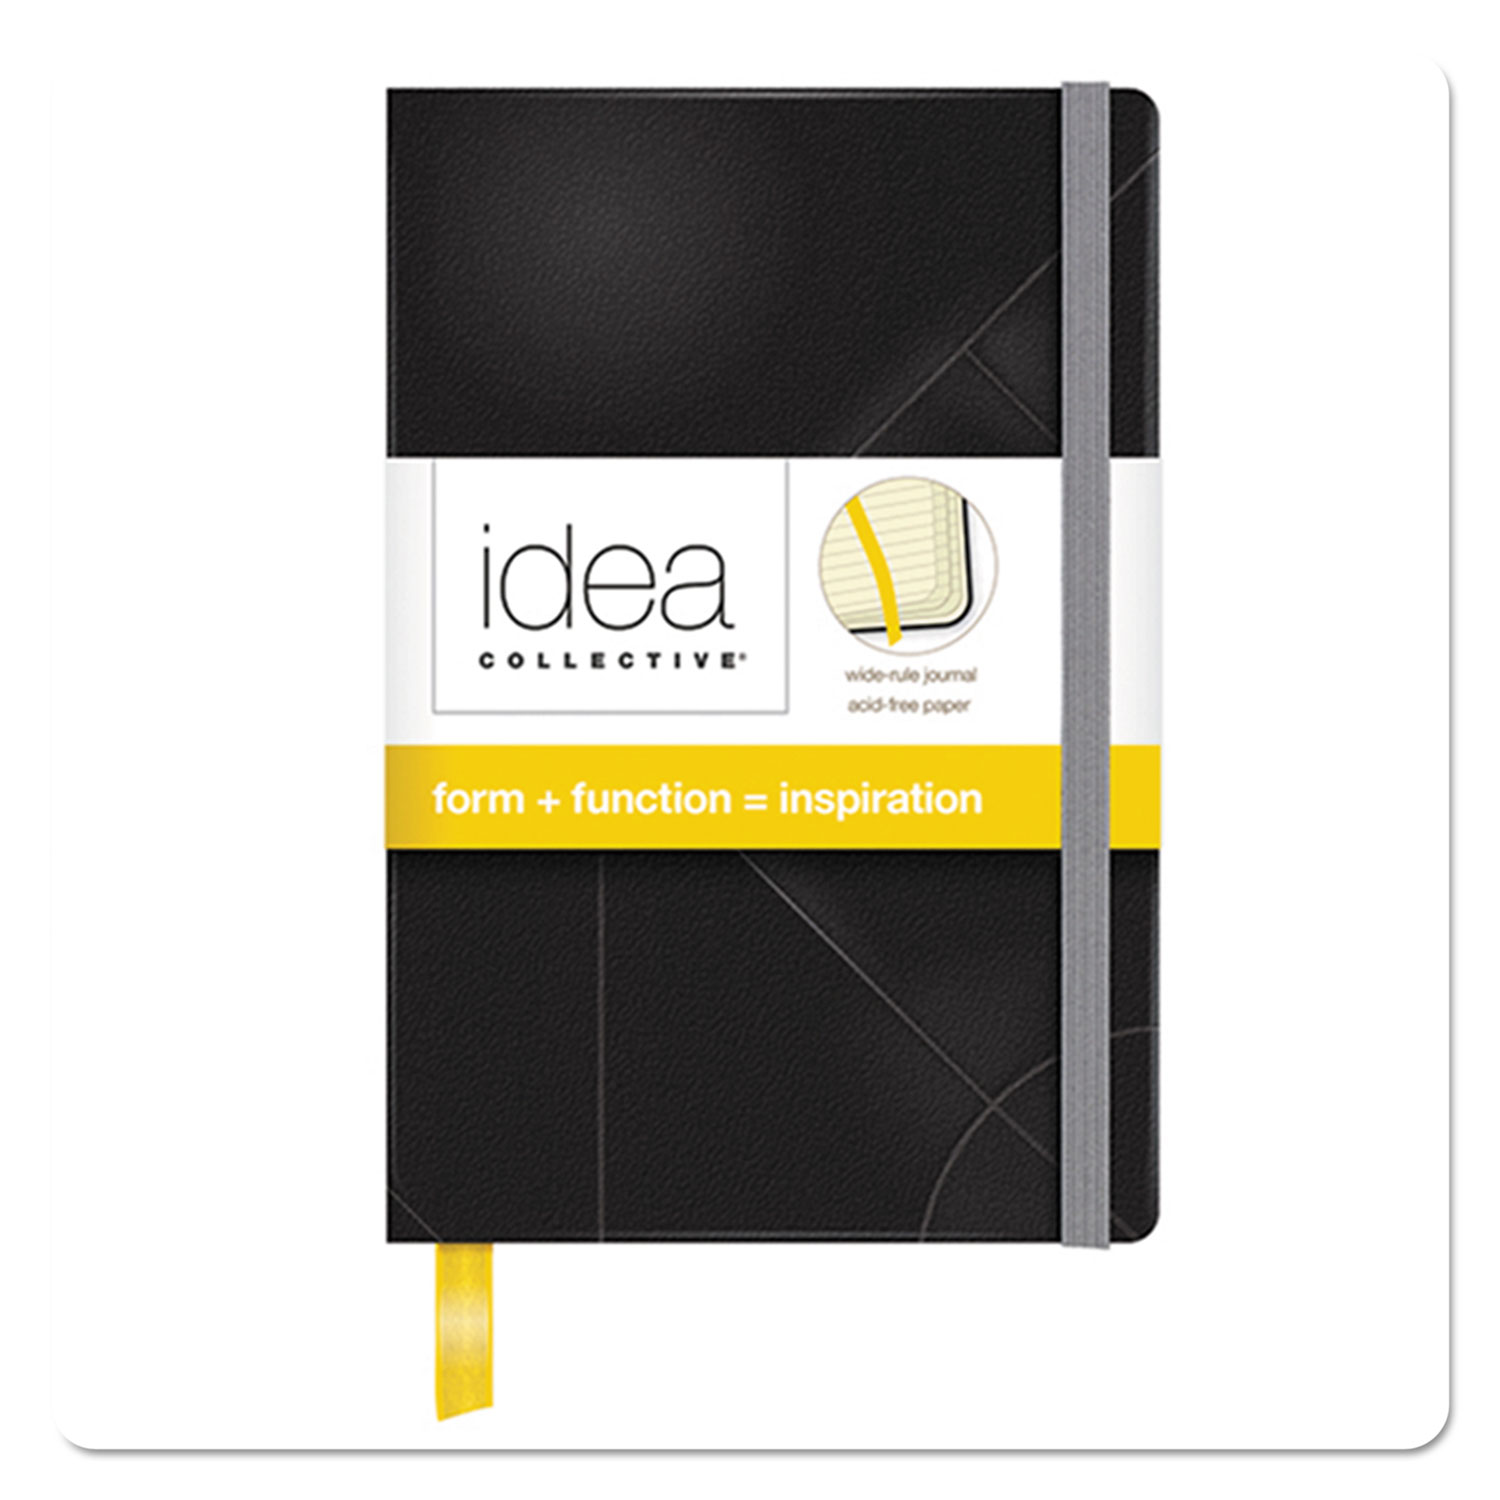  TOPS 56874 Idea Collective Journal, Wide/Legal Rule, Black Cover, 5.5 x 3.5, 96 Sheets (TOP56874) 